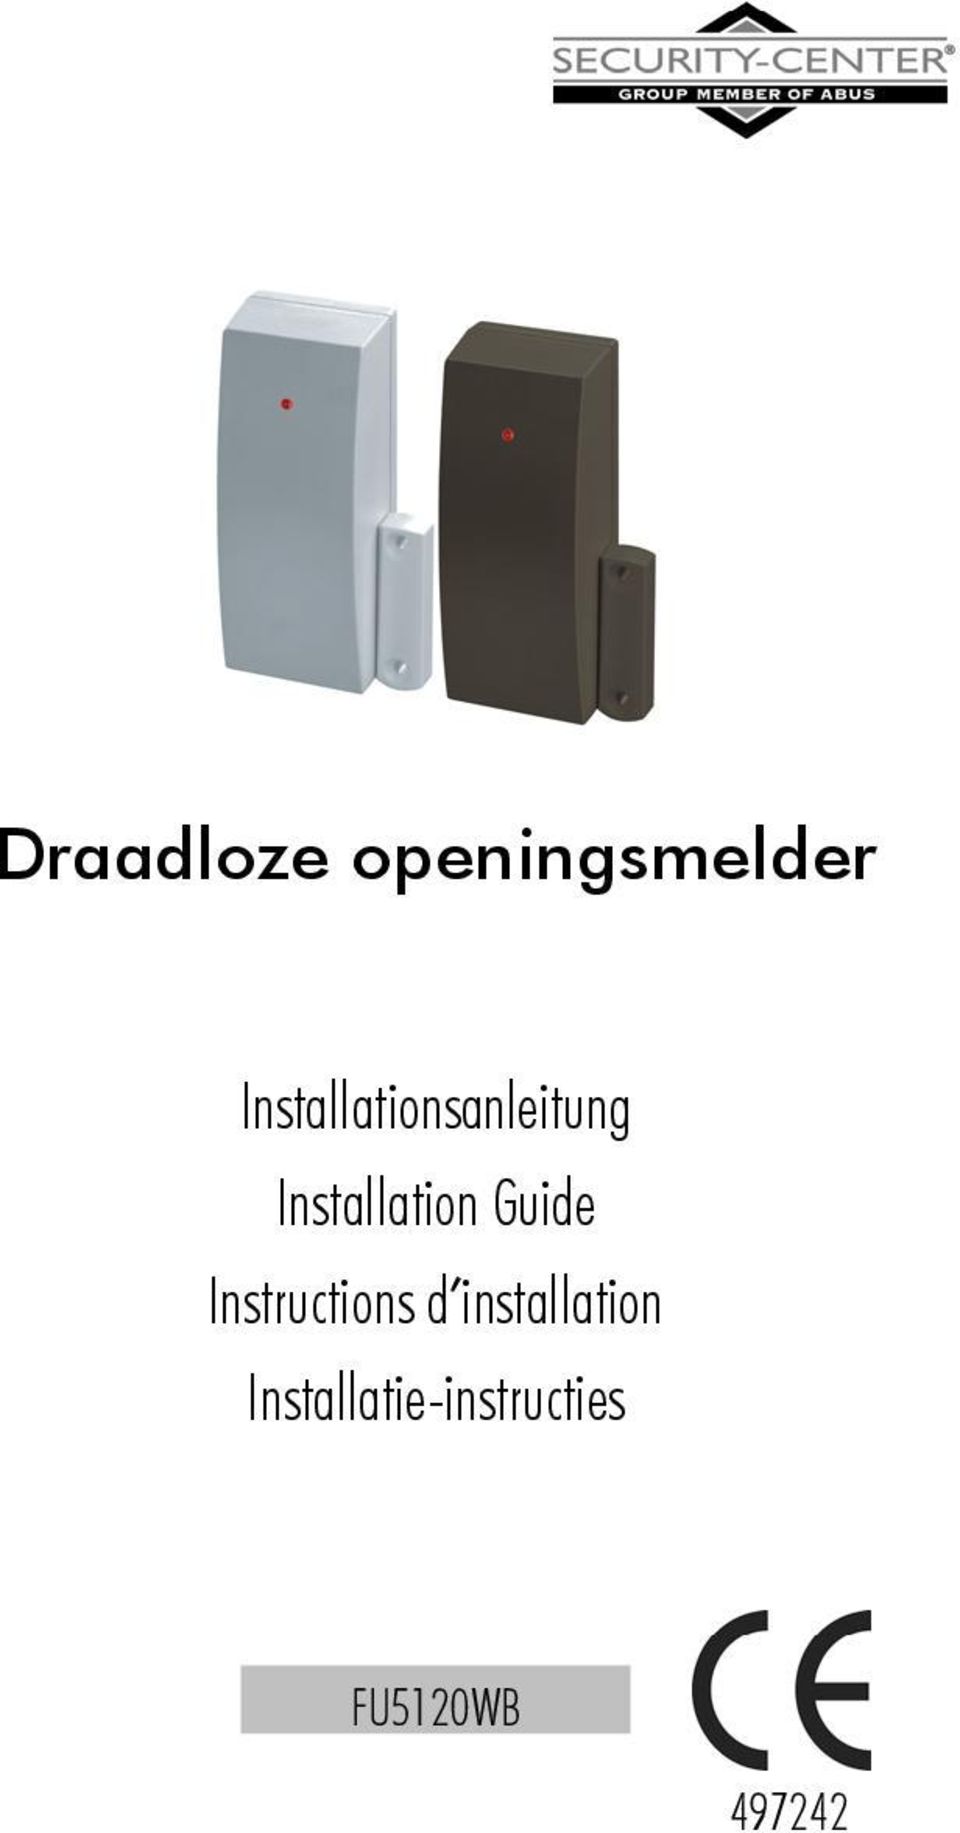 Installation Guide Instructions d